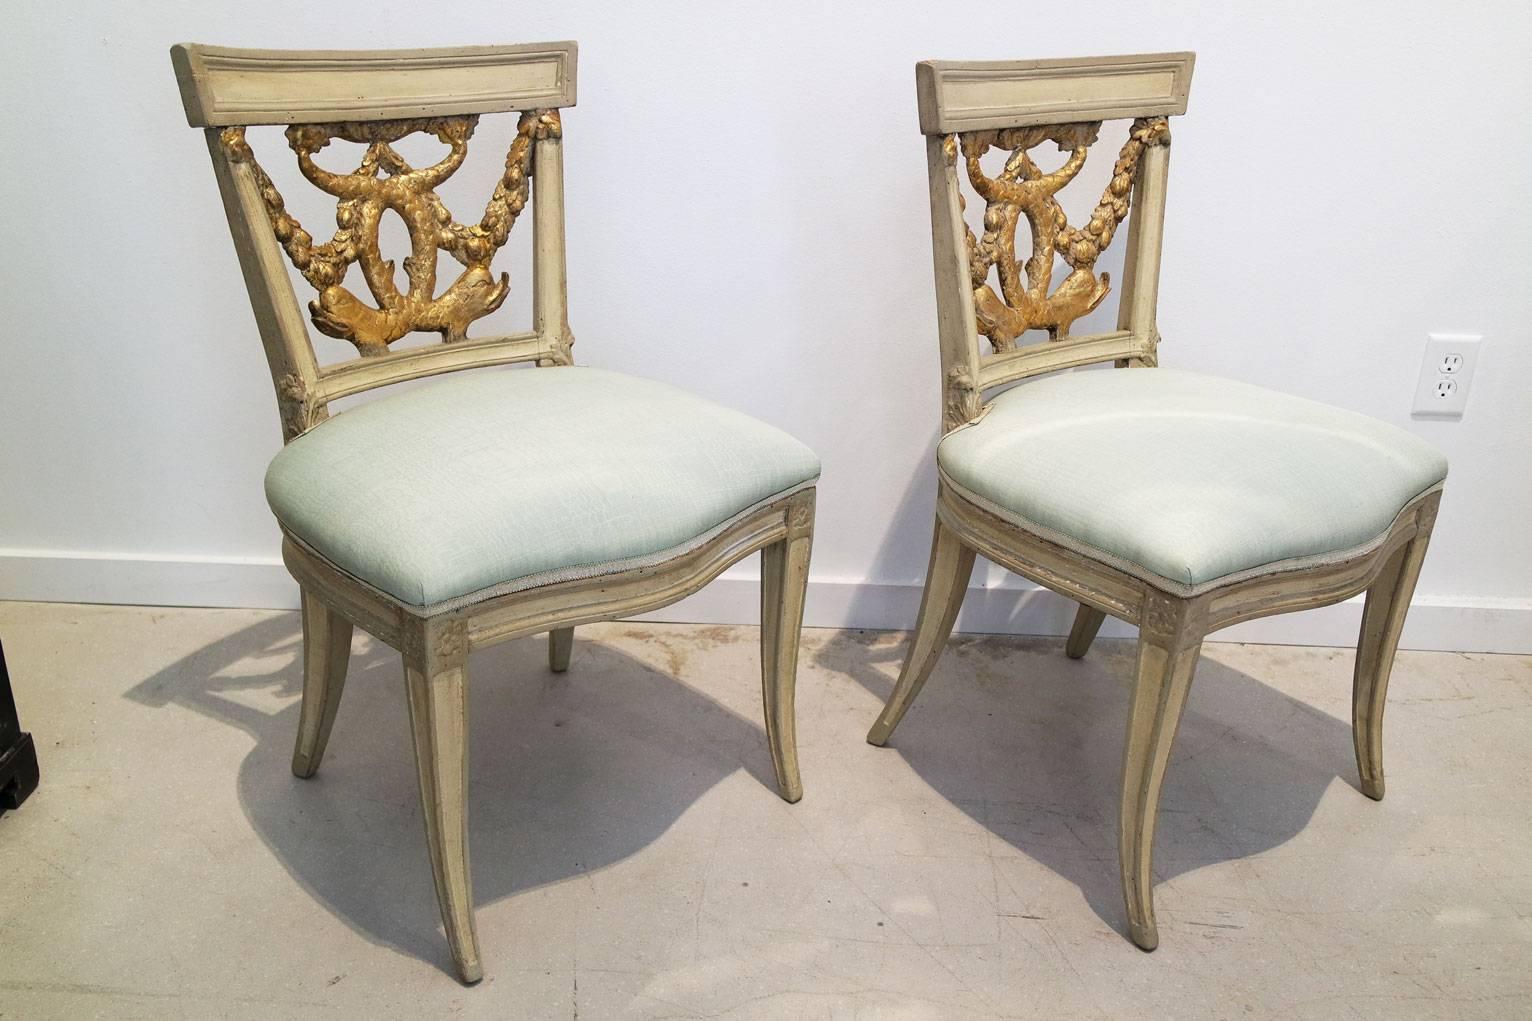 Carved Pair of Italian Neoclassical Painted and Partial Gilt Side Chairs